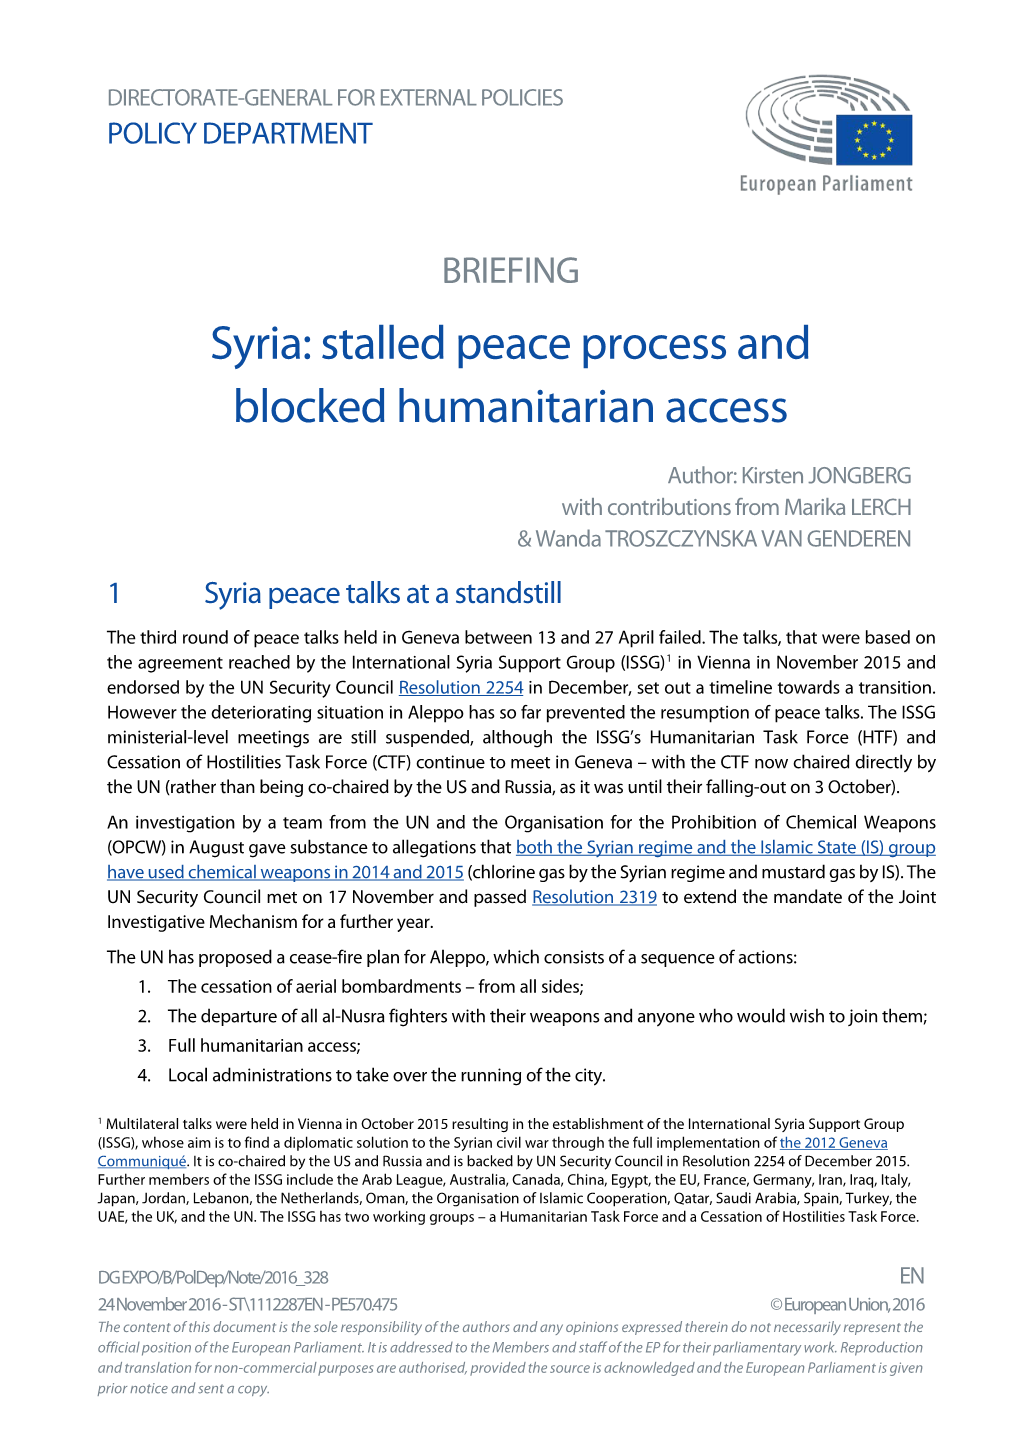 Syria: Stalled Peace Process and Blocked Humanitarian Access